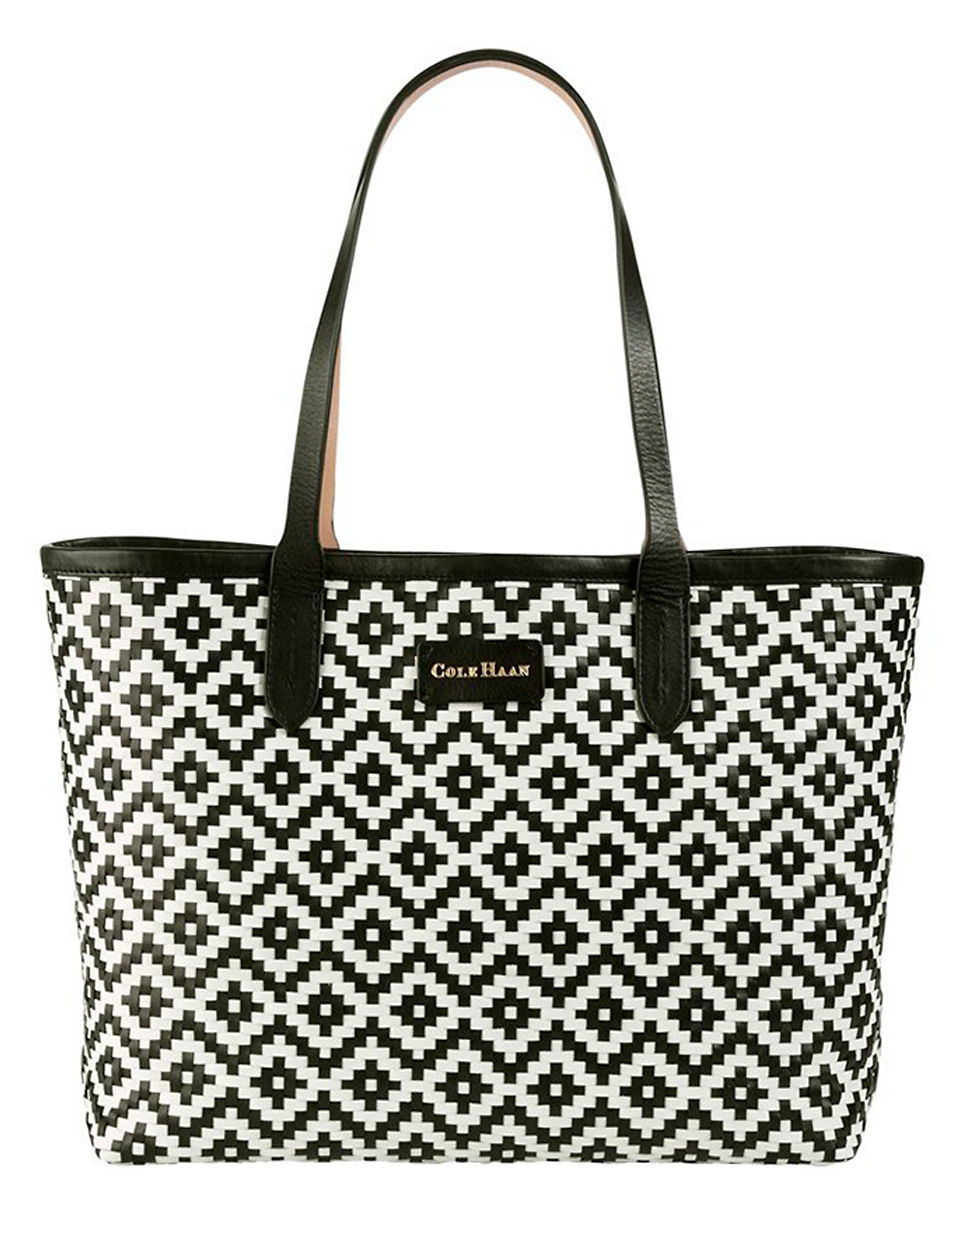 Cole haan Woven Leather Tote Bag in Black | Lyst